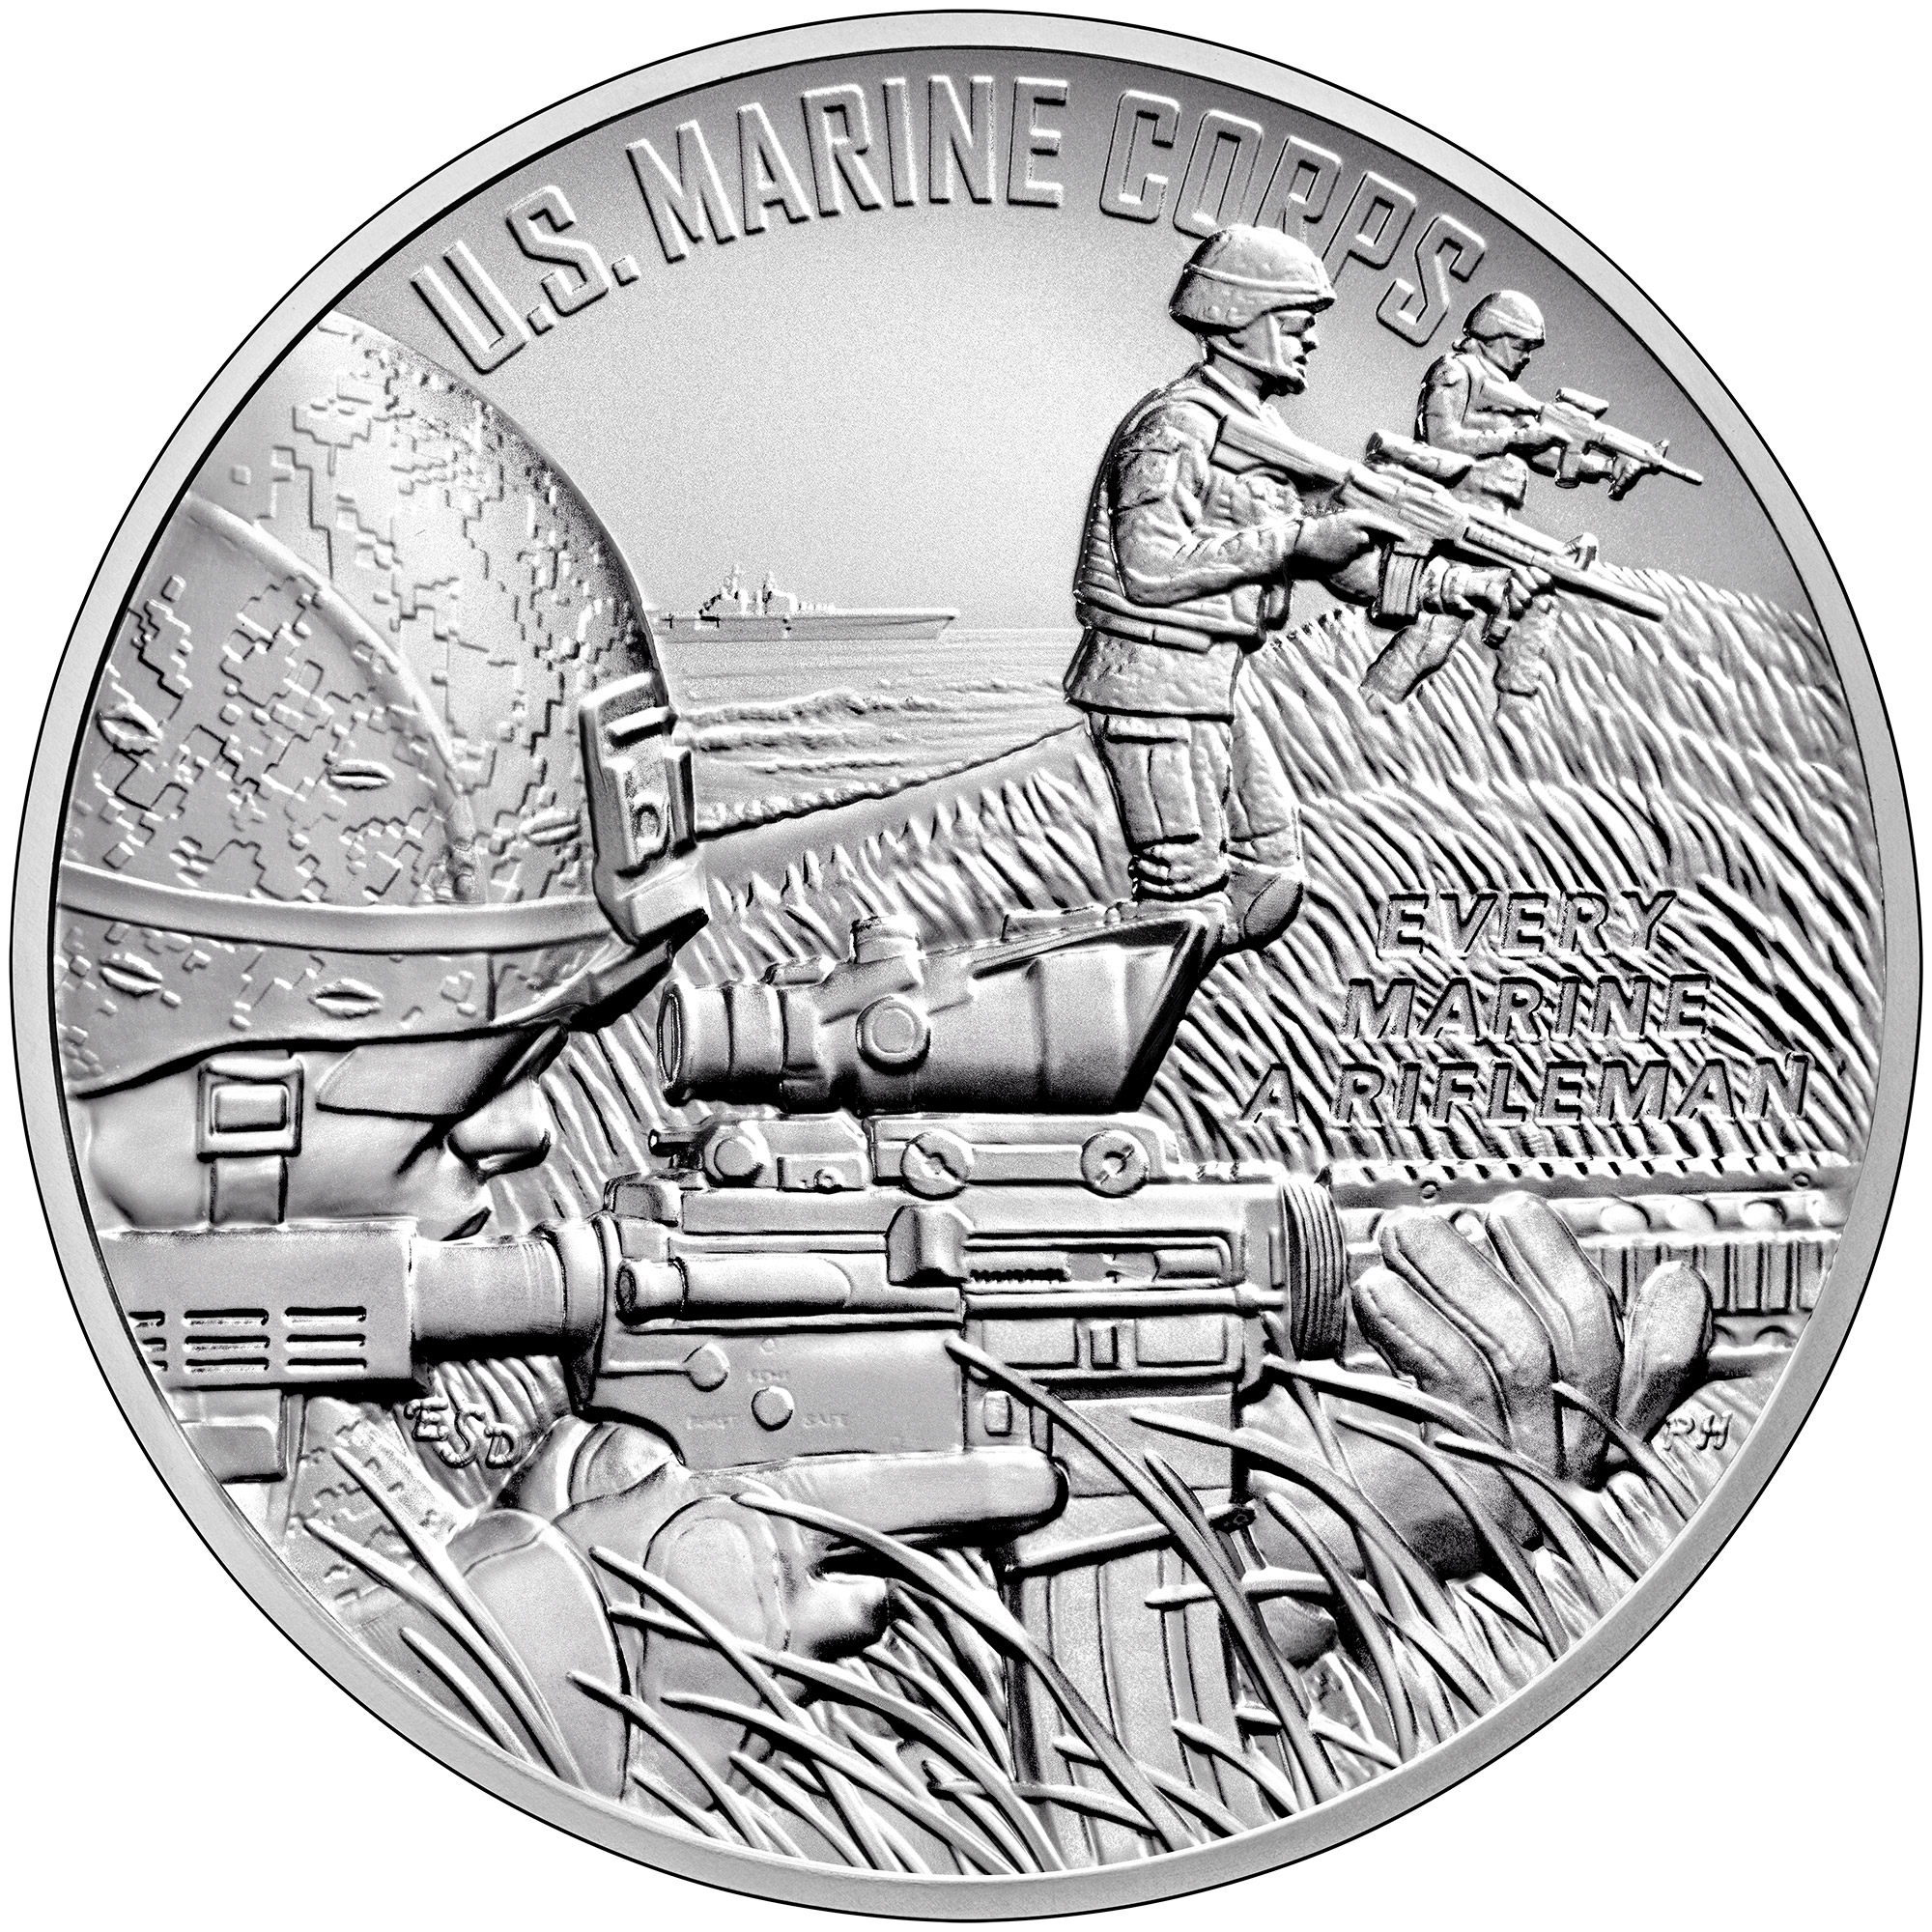 Armed Forces Silver Medal U.S. Marine Corps Obverse